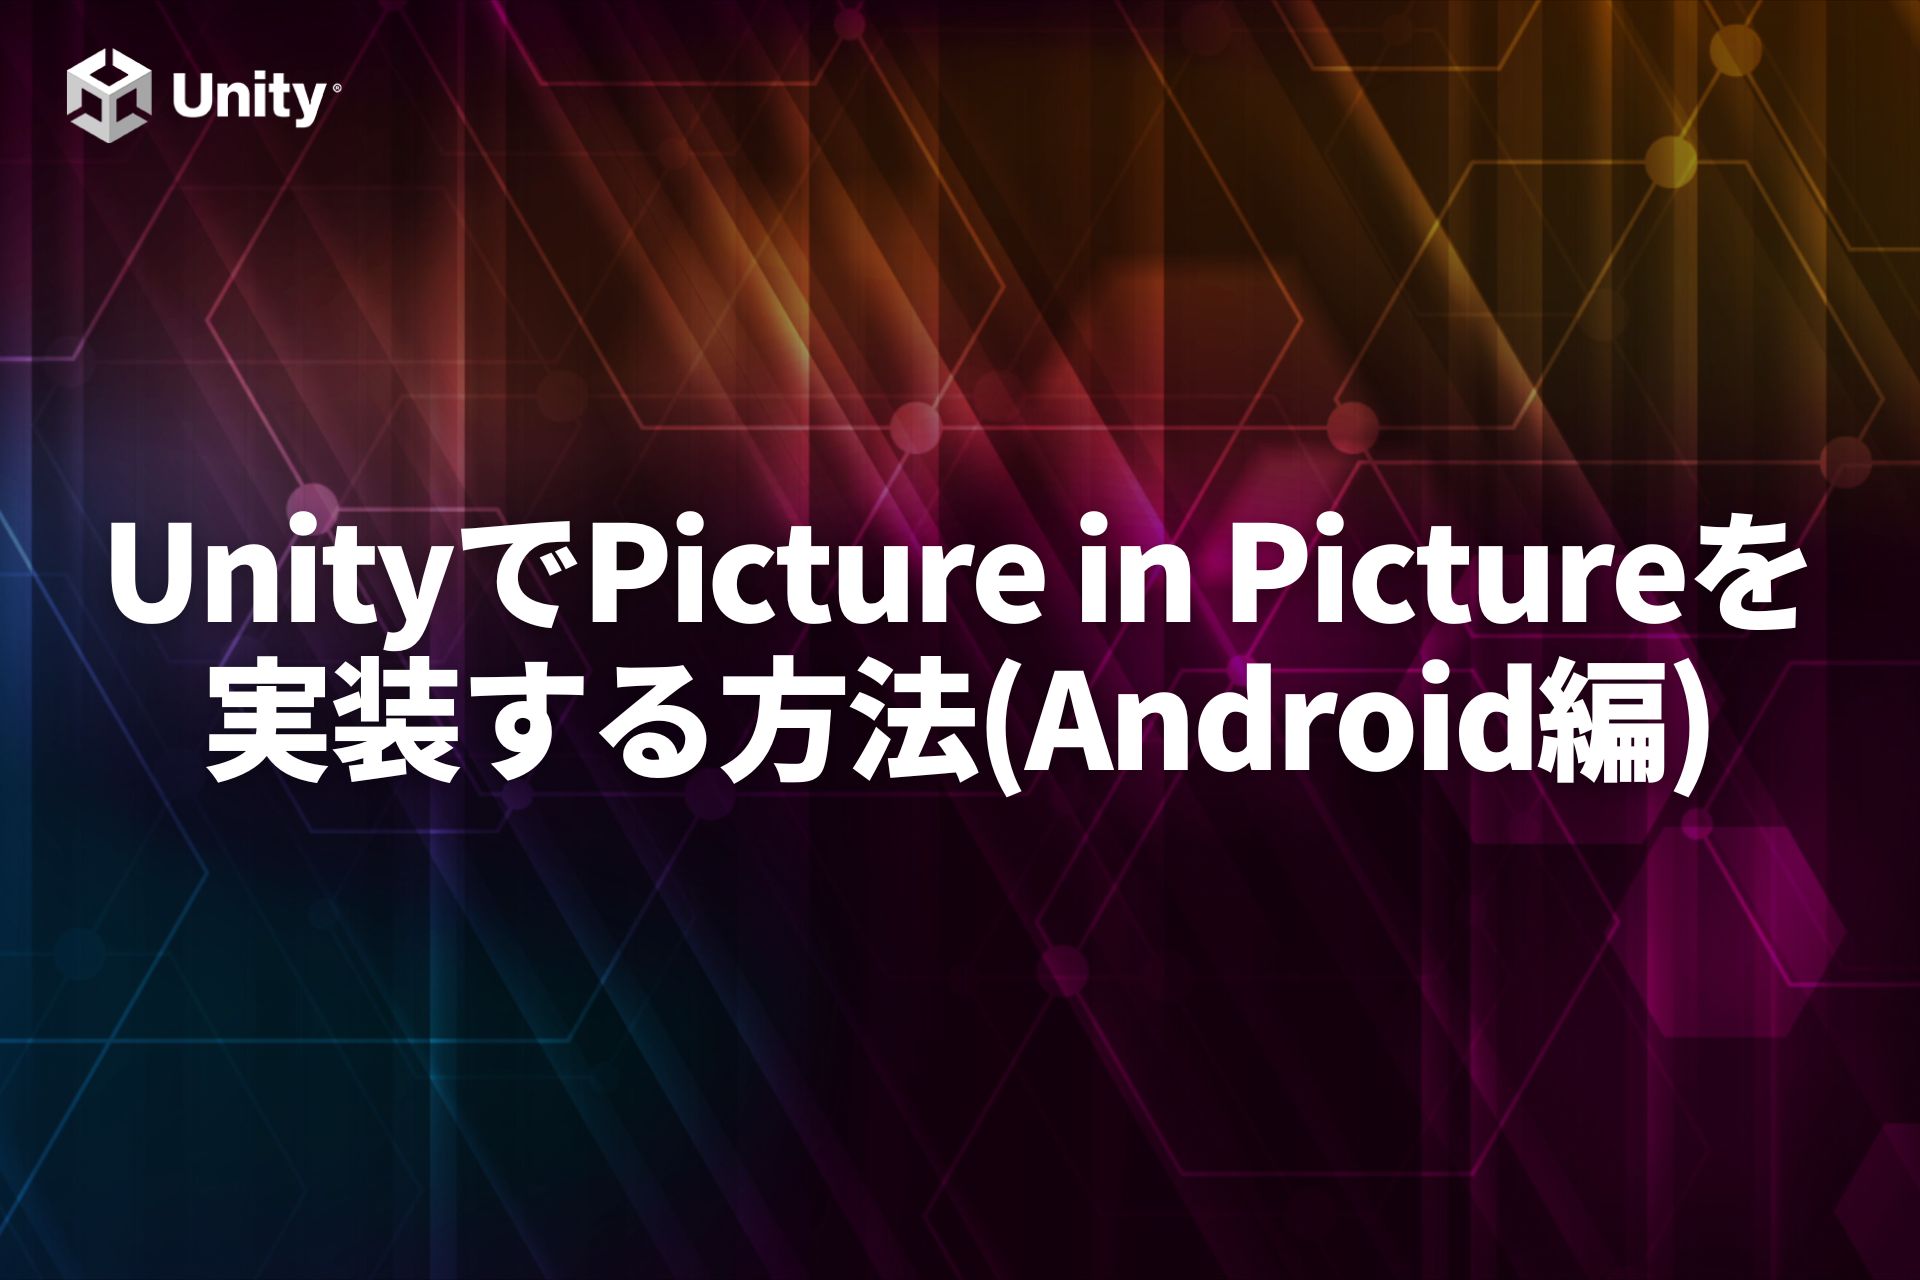 UnityでPicture in Pictureを実装する方法(Android編)